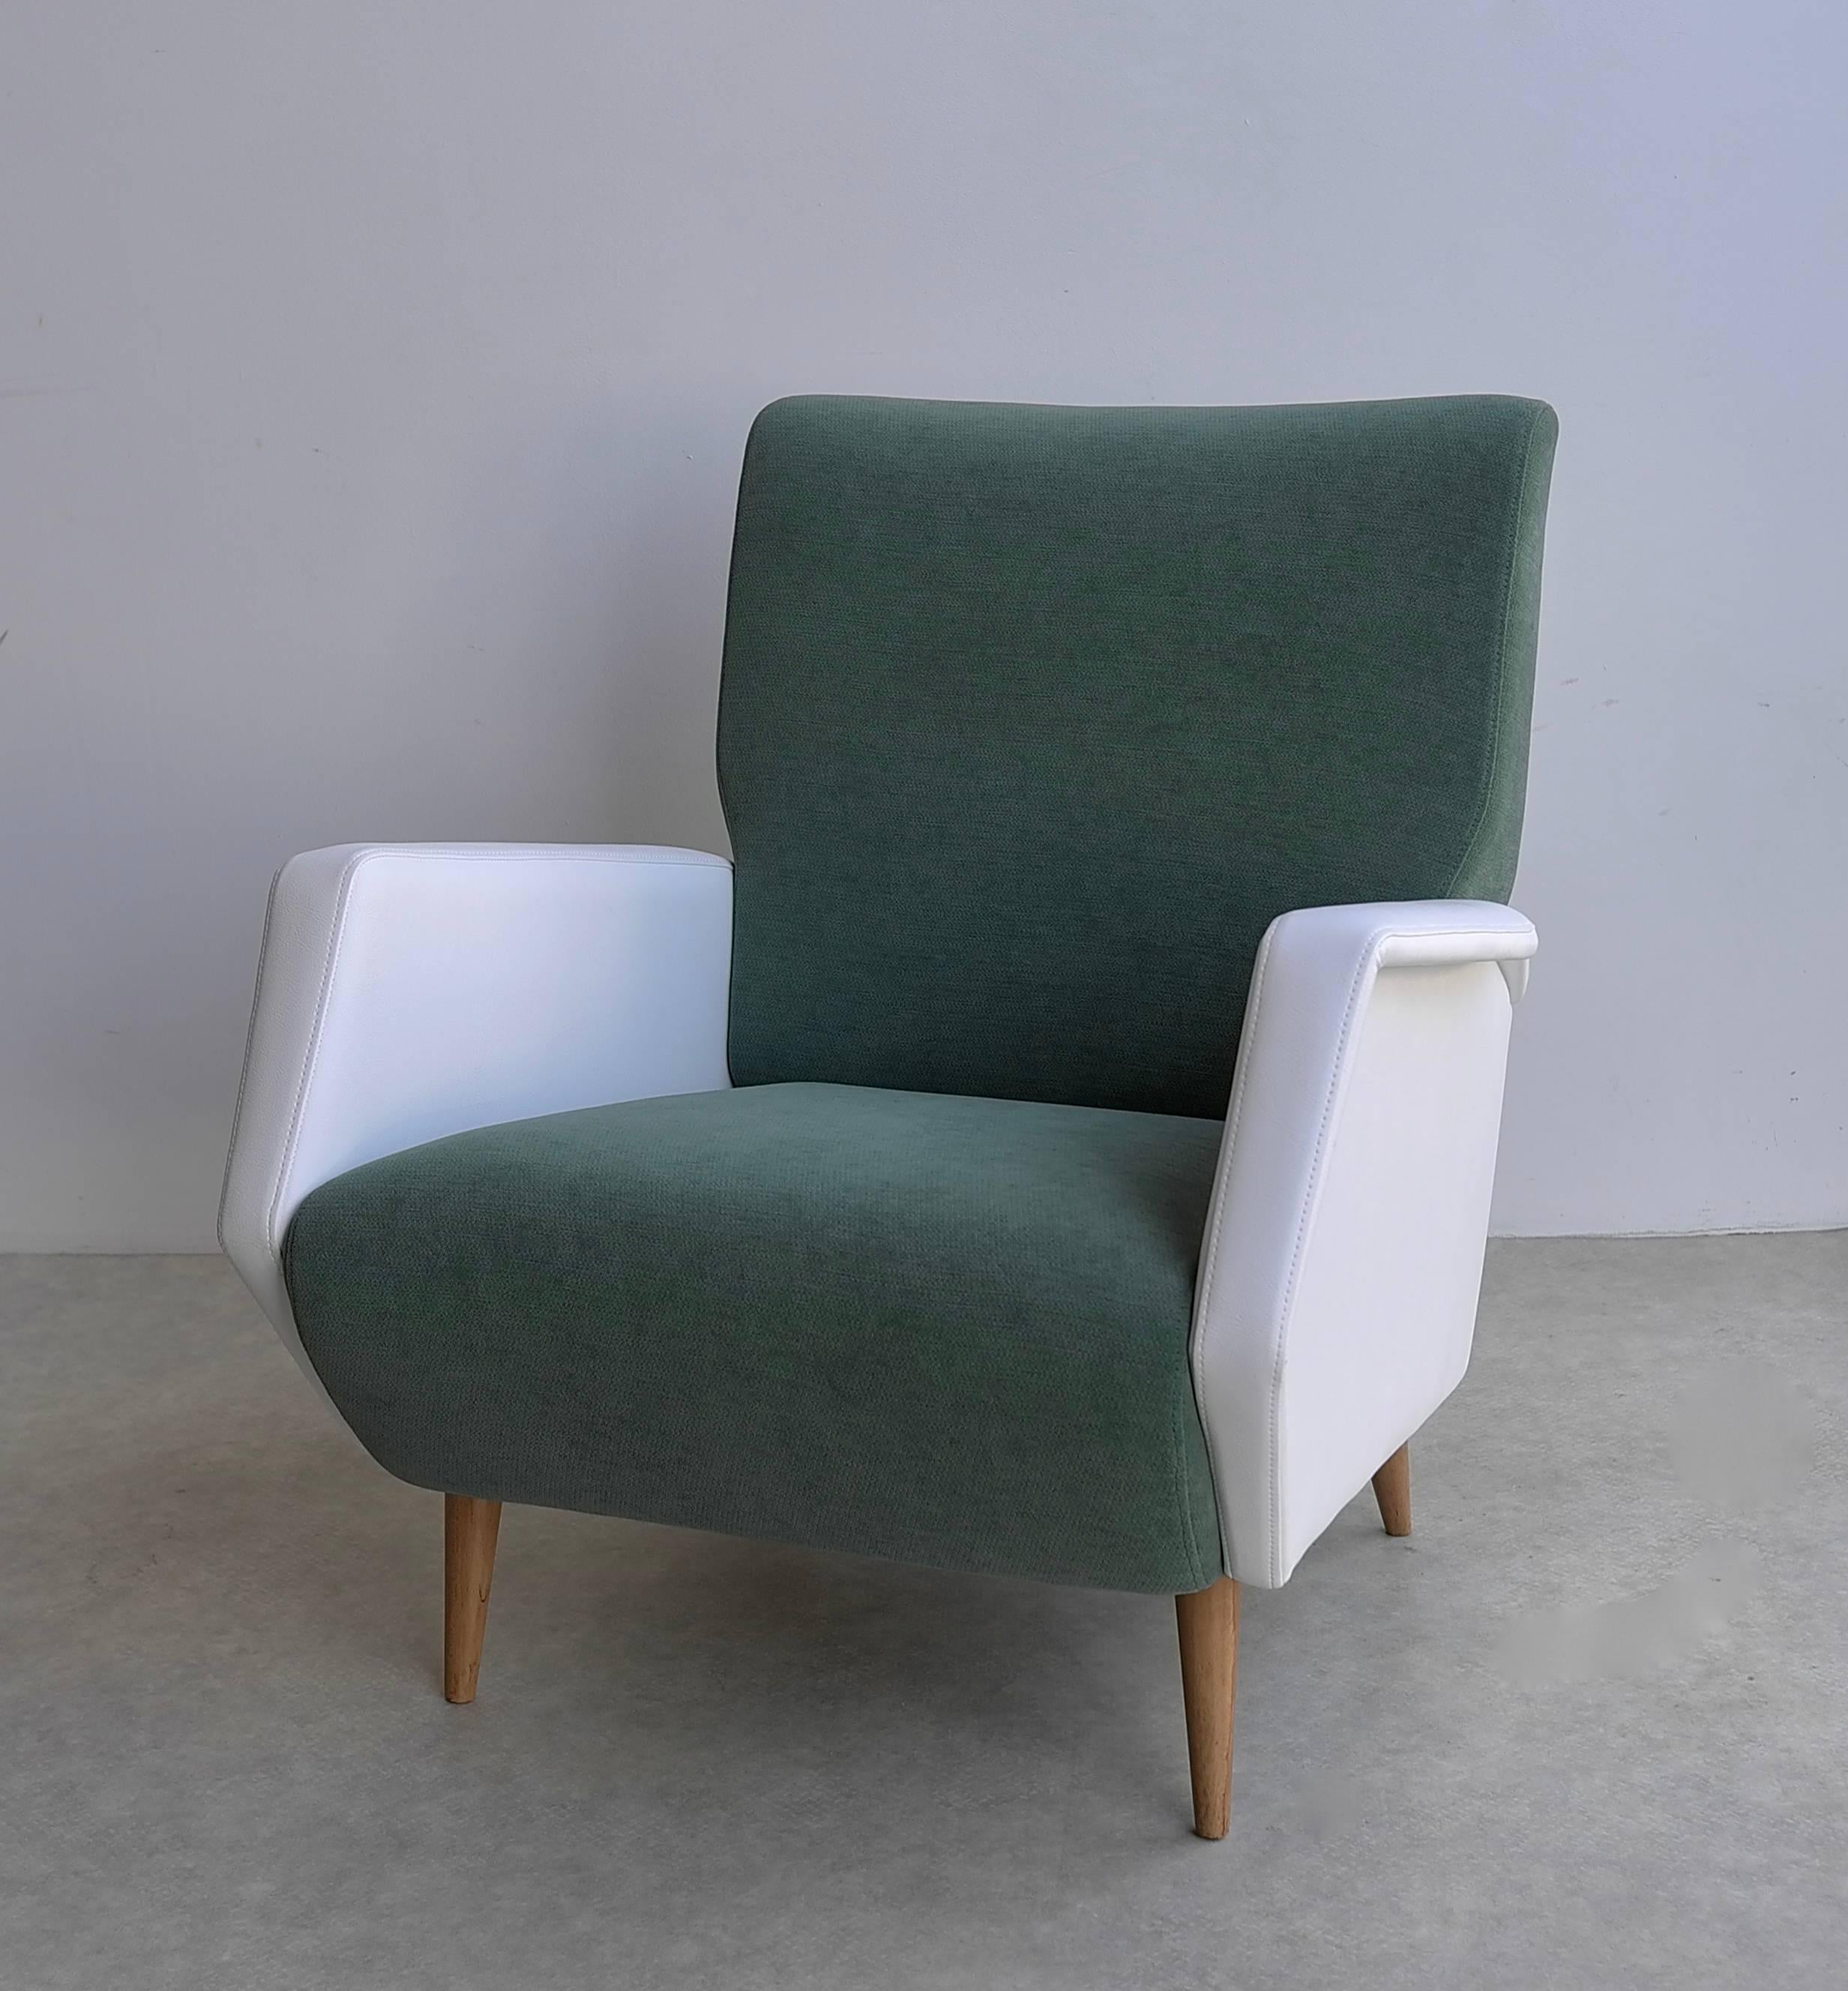 Gio Ponti armchair model 803, Italy, 1954.

Cassina, Italy, 1954.
Faux leather upholstery, walnut.
Measurements: 29.5 W x 33 D x 31 H inches.

Excellent condition, newly upholstered according to the original design in detail.
Upholstered in